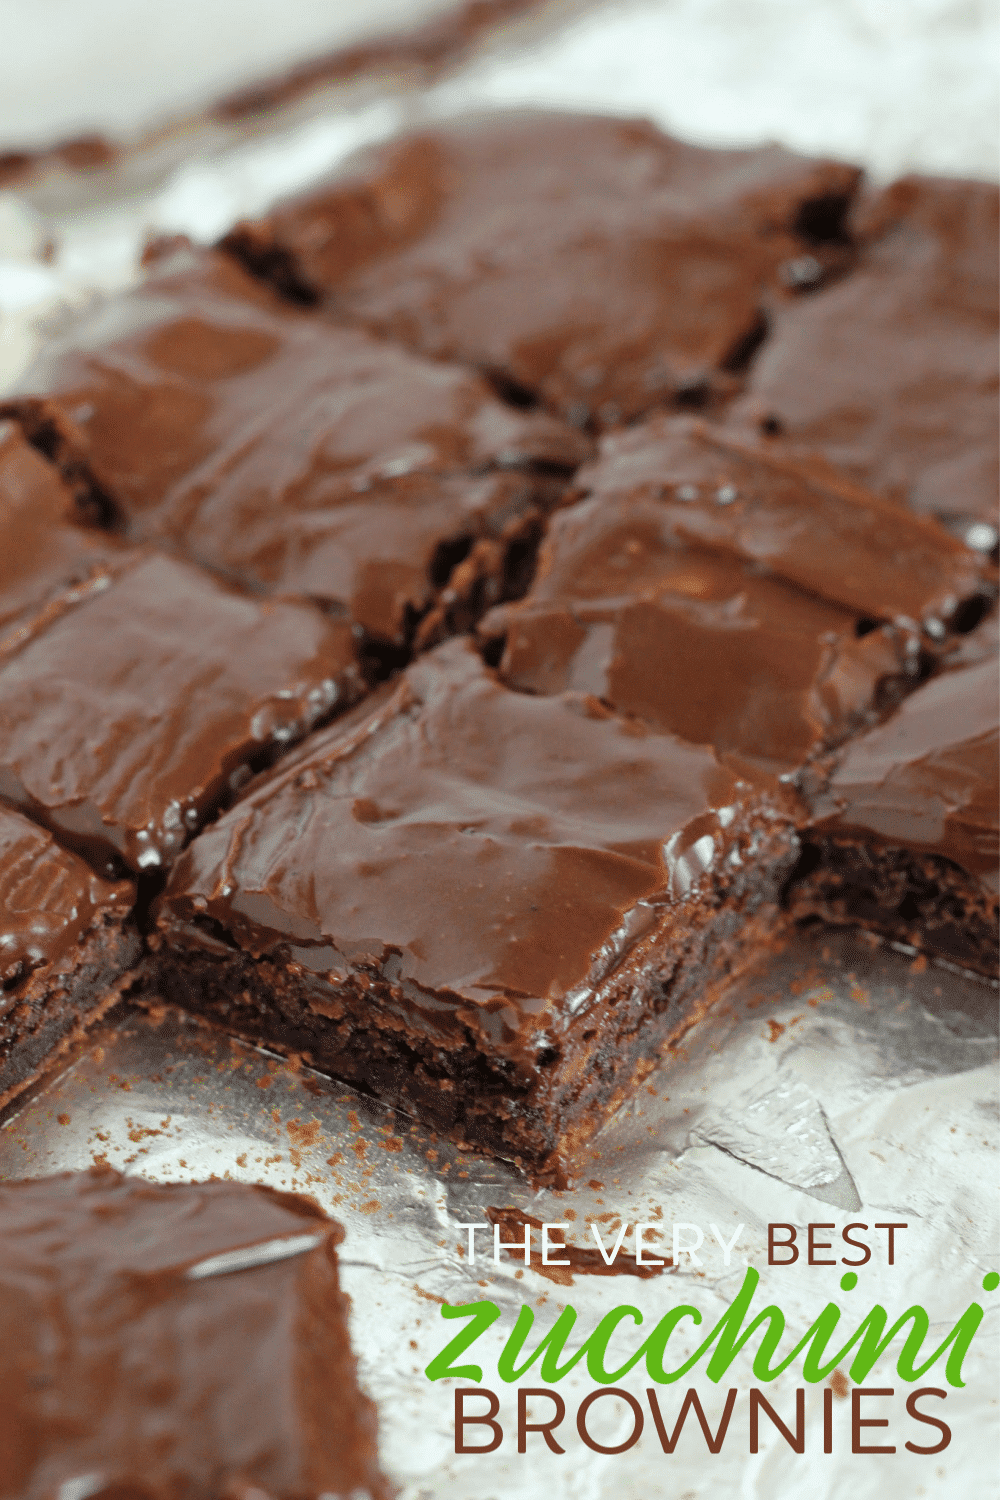 I think this chocolate zucchini brownies recipe is my new favorite brownie recipe and maybe even my favorite zucchini recipe!